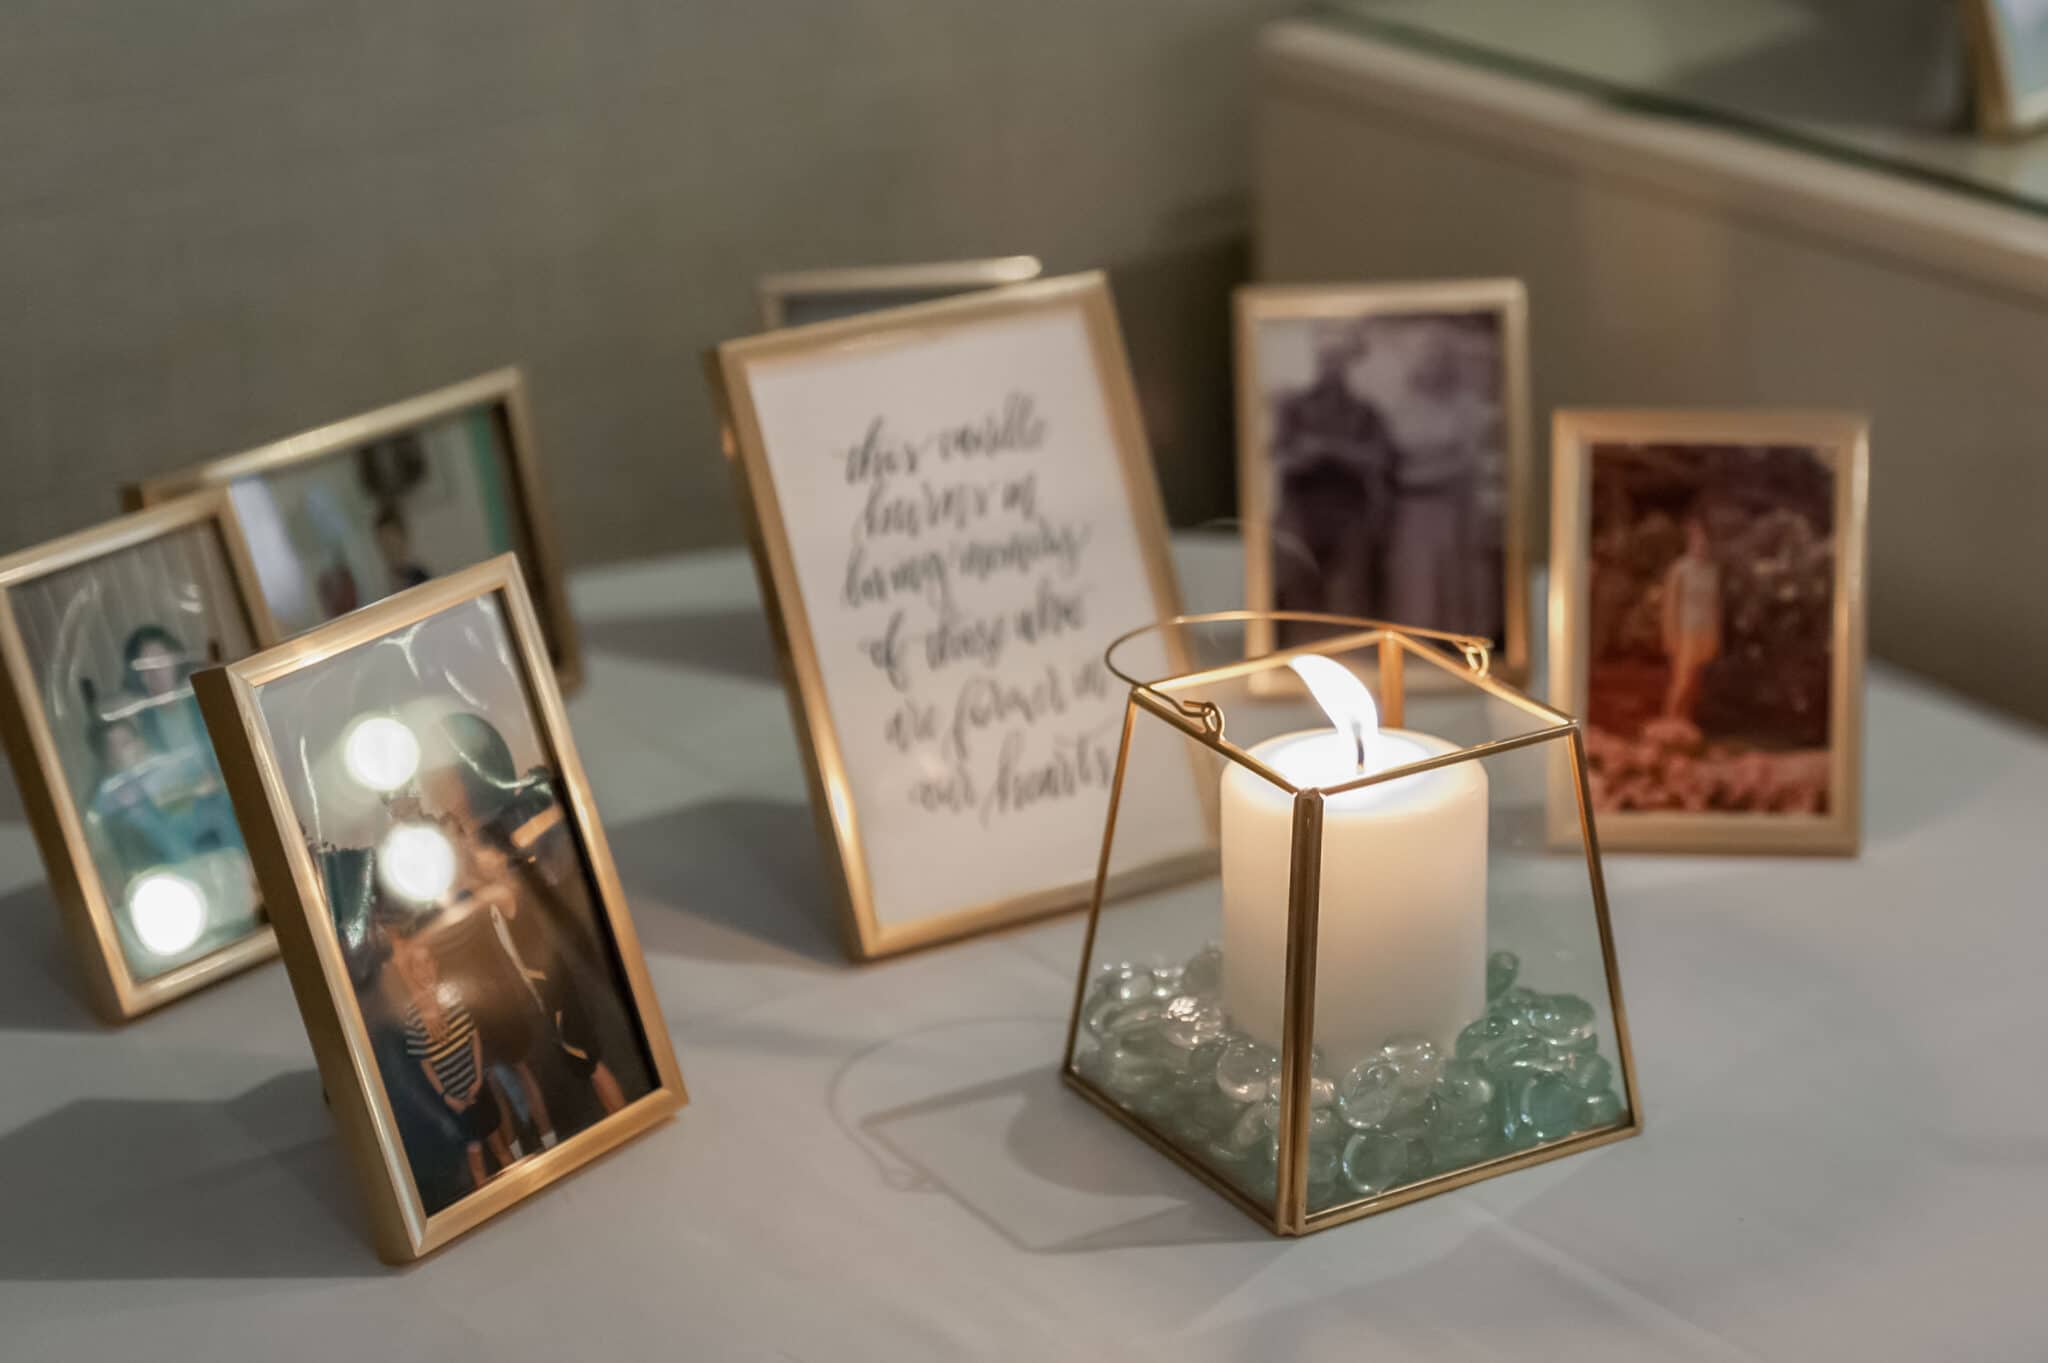 If deceased, consider honoring your dad on your wedding day with a memory table filled with photos and a candle.